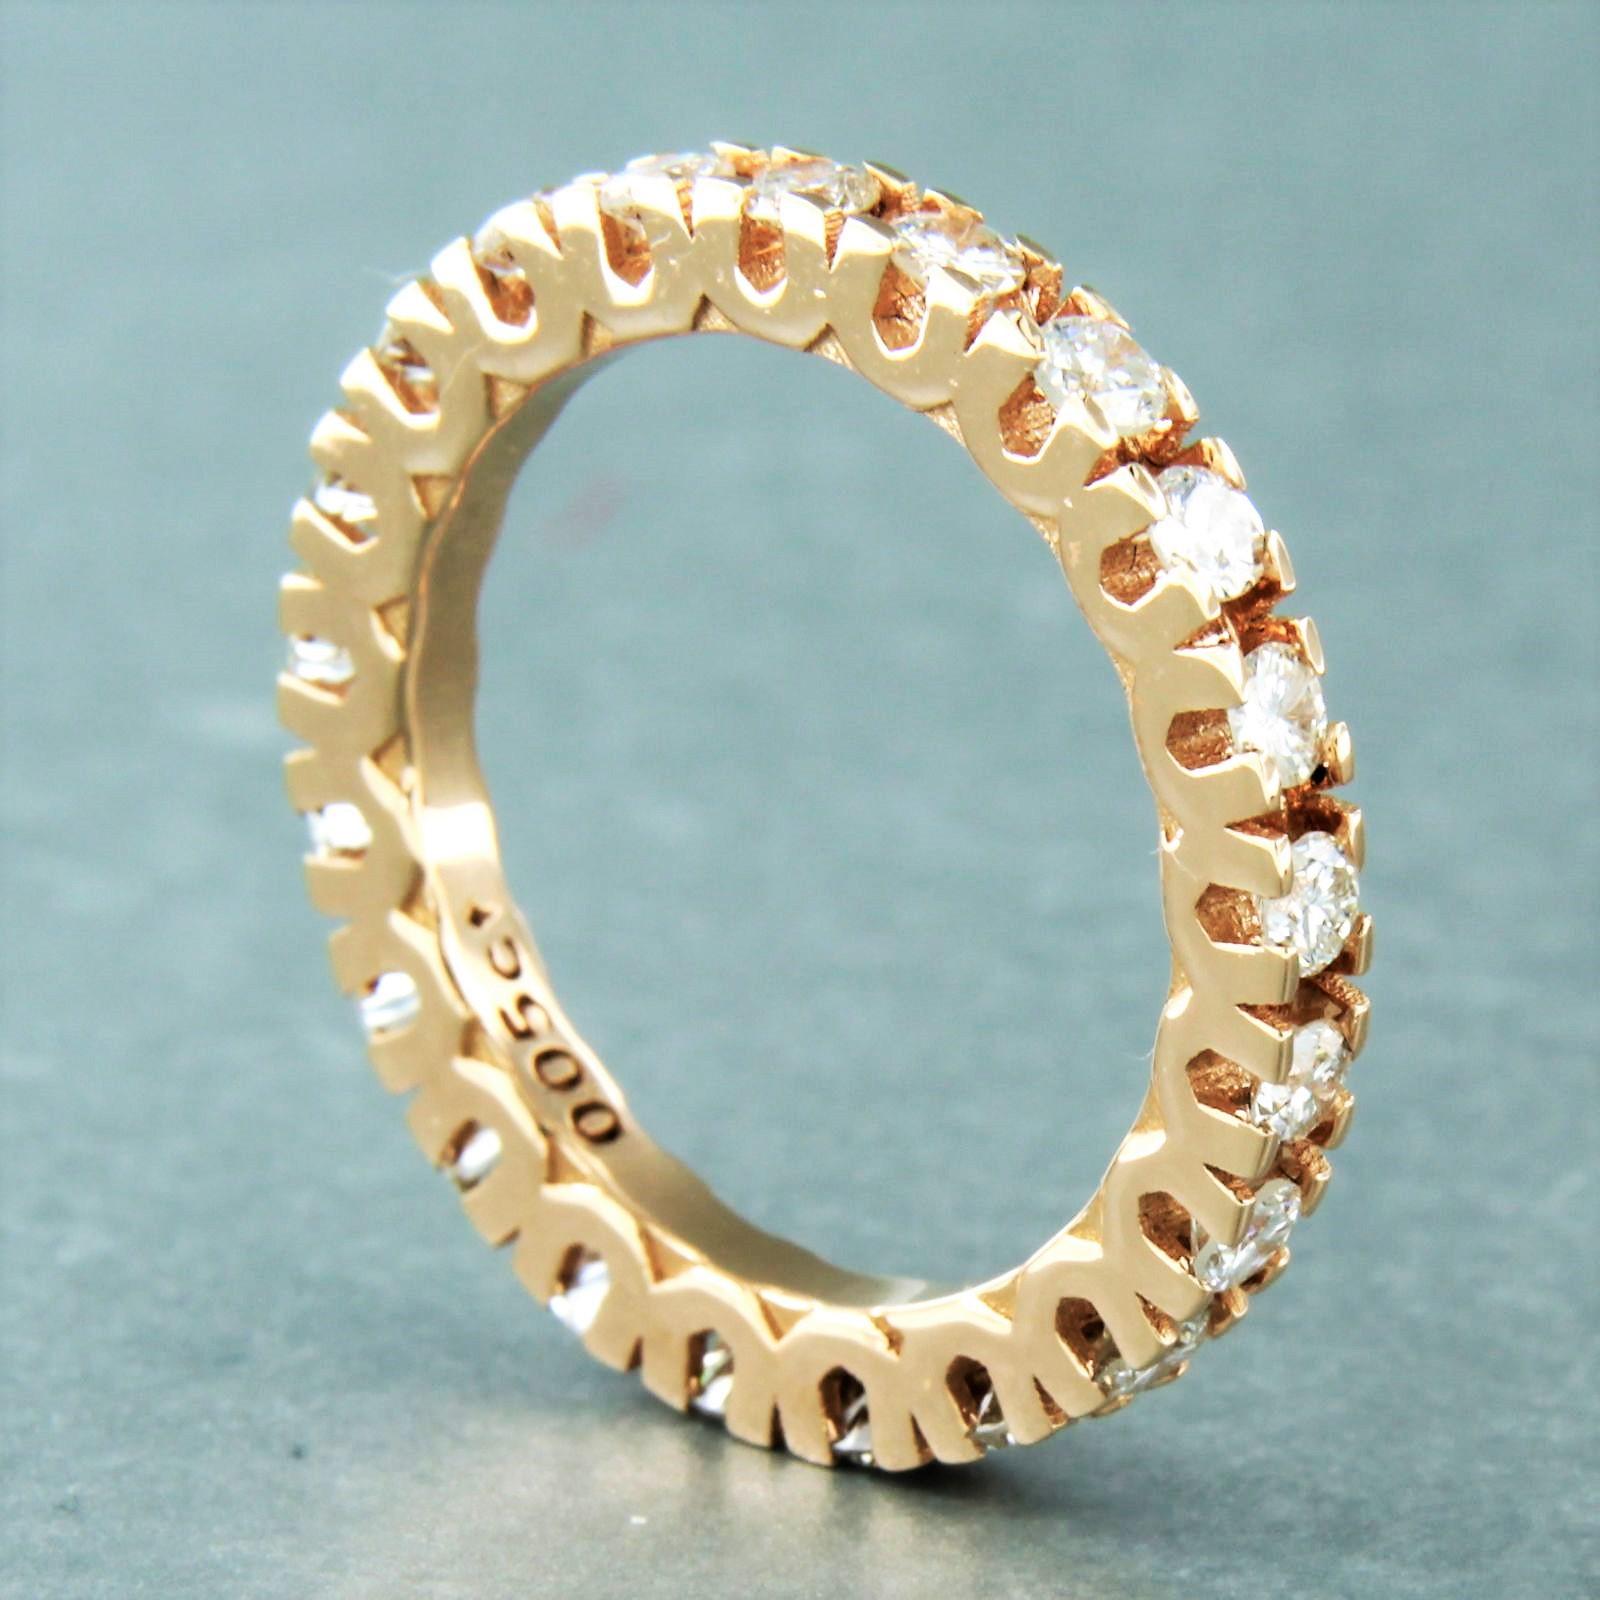 18k pink gold eternity ring set with brilliant cut diamonds up to. 1.30ct. ring size U.S. 7.25 - EU.  17.5 (55) EU

Detailed description

The ring is 2.5 mm wide and 3.2 mm high

ringsize U.S. 7.25 - EU.  17.5 (55) 

weight: 4.1 grams

Set with :

-